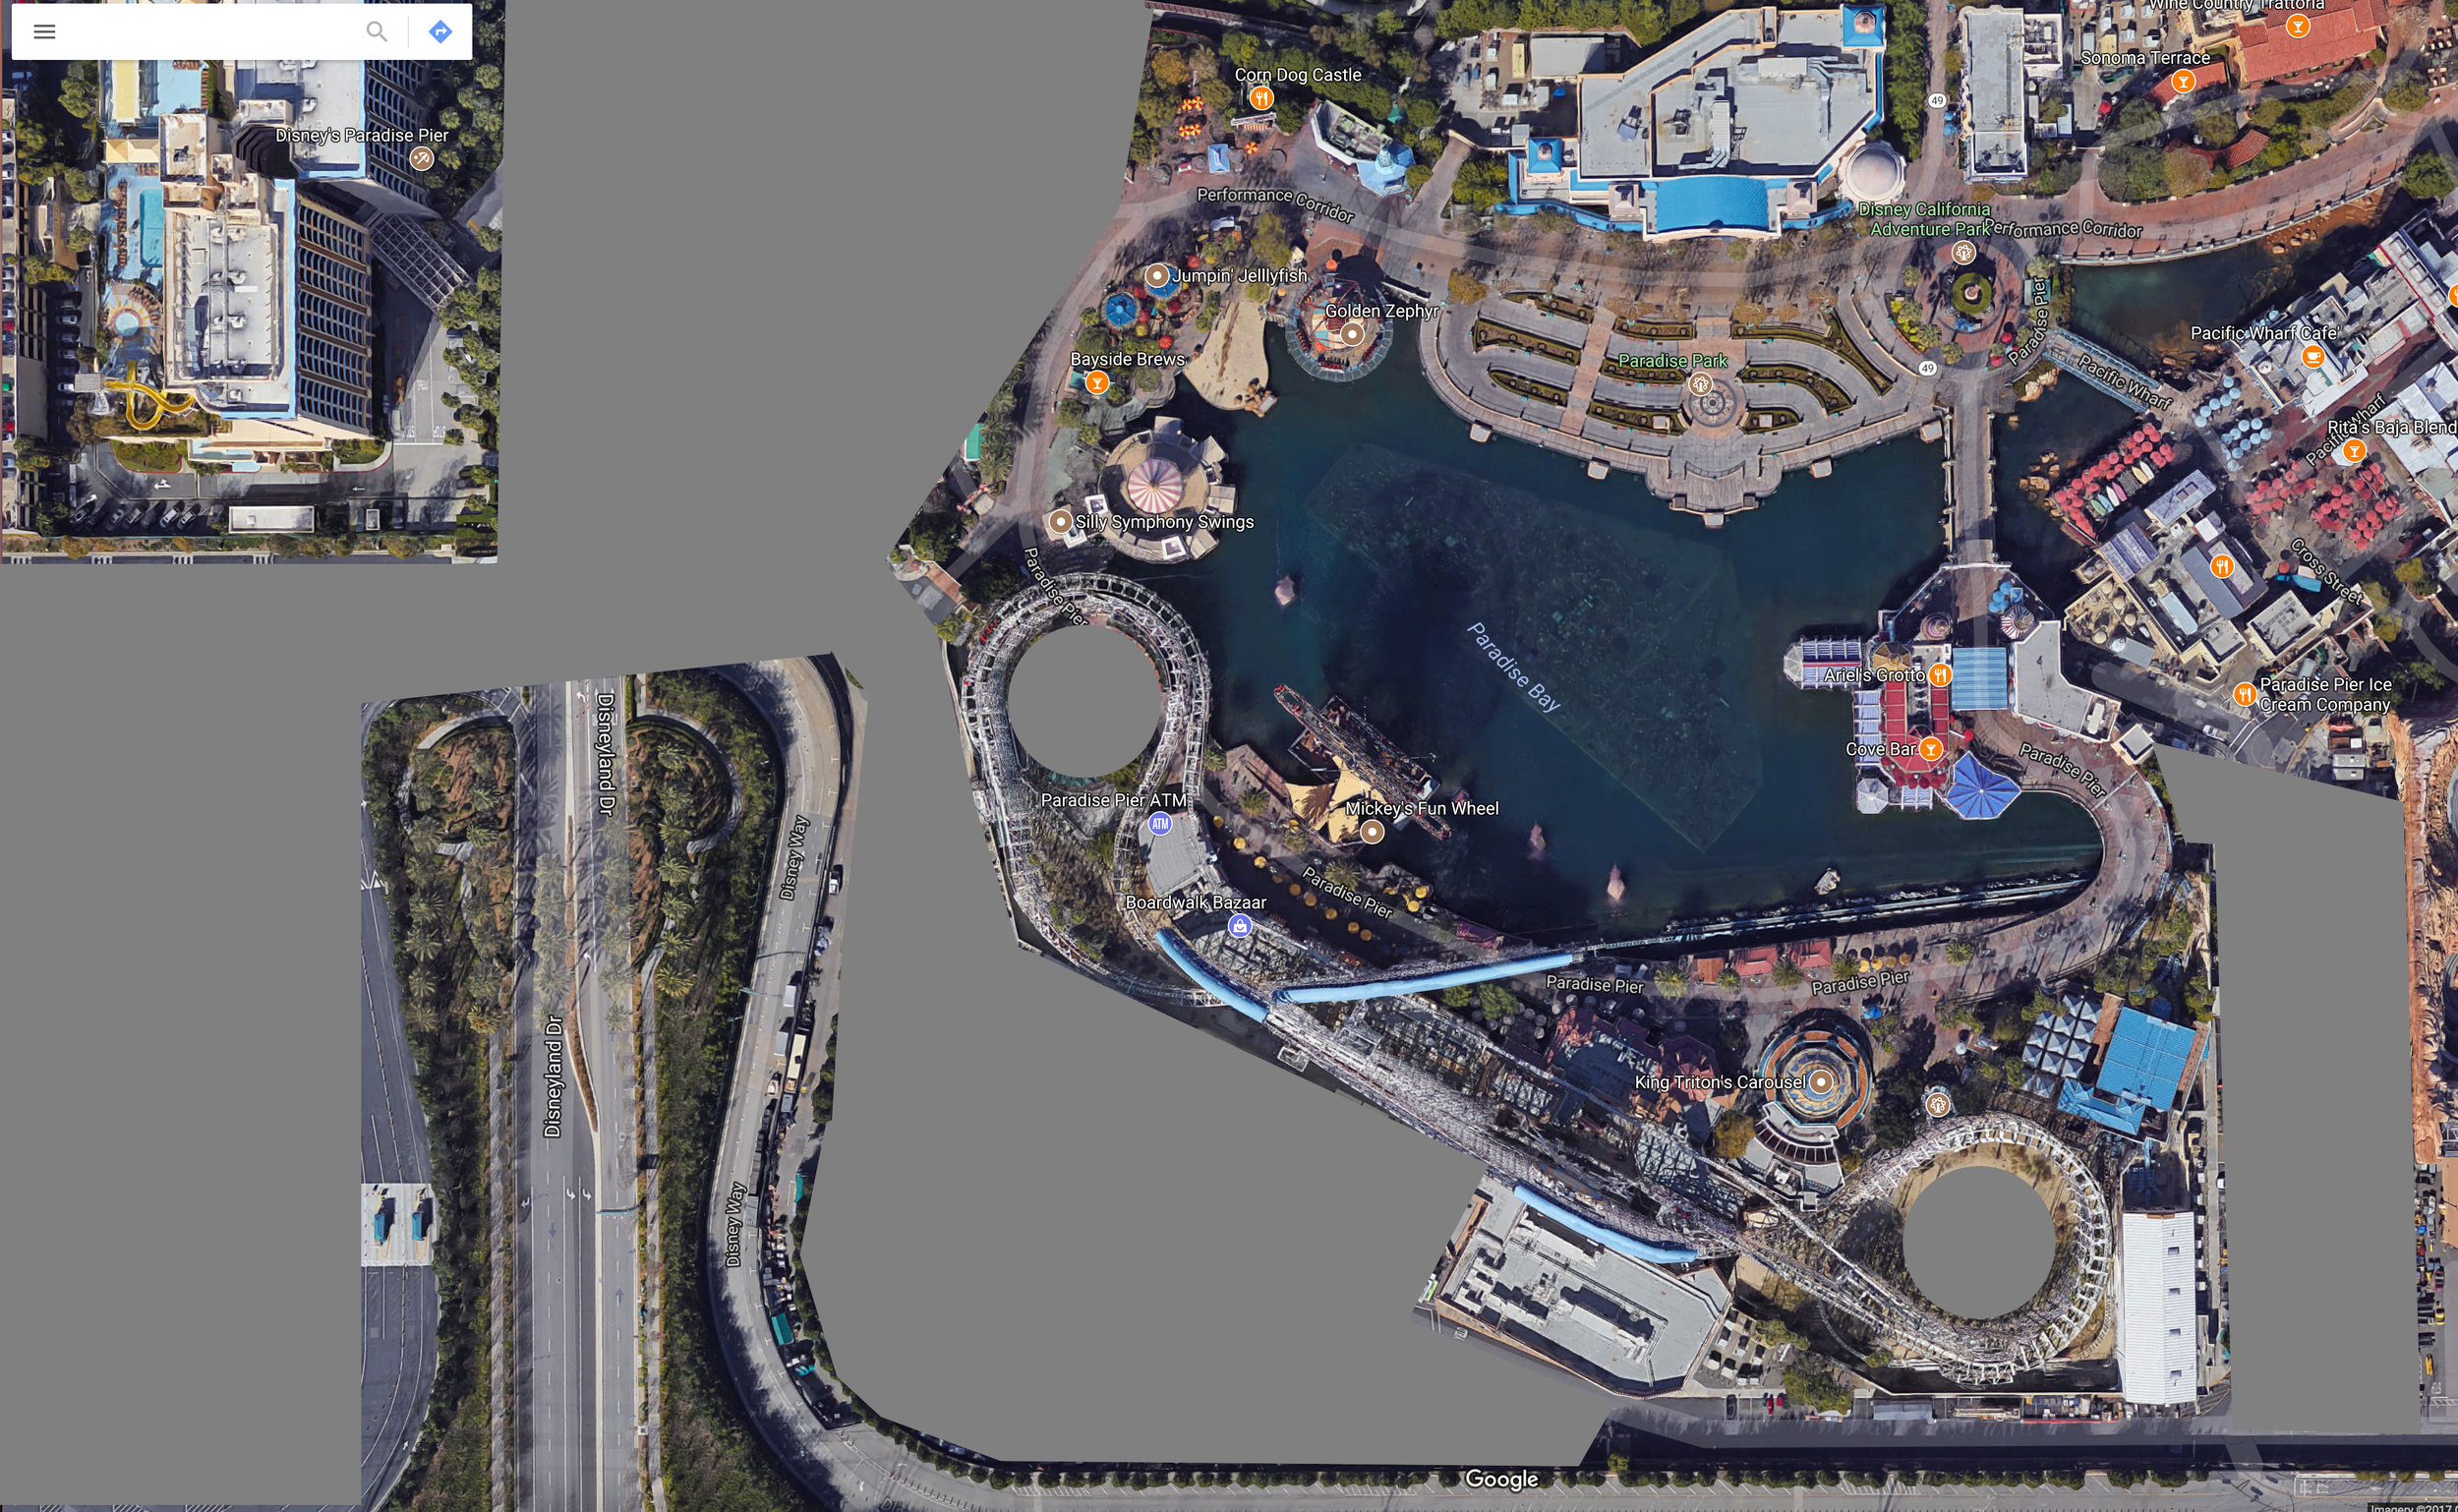  Long term amount of backstage land that could be opened up as themed environment. 